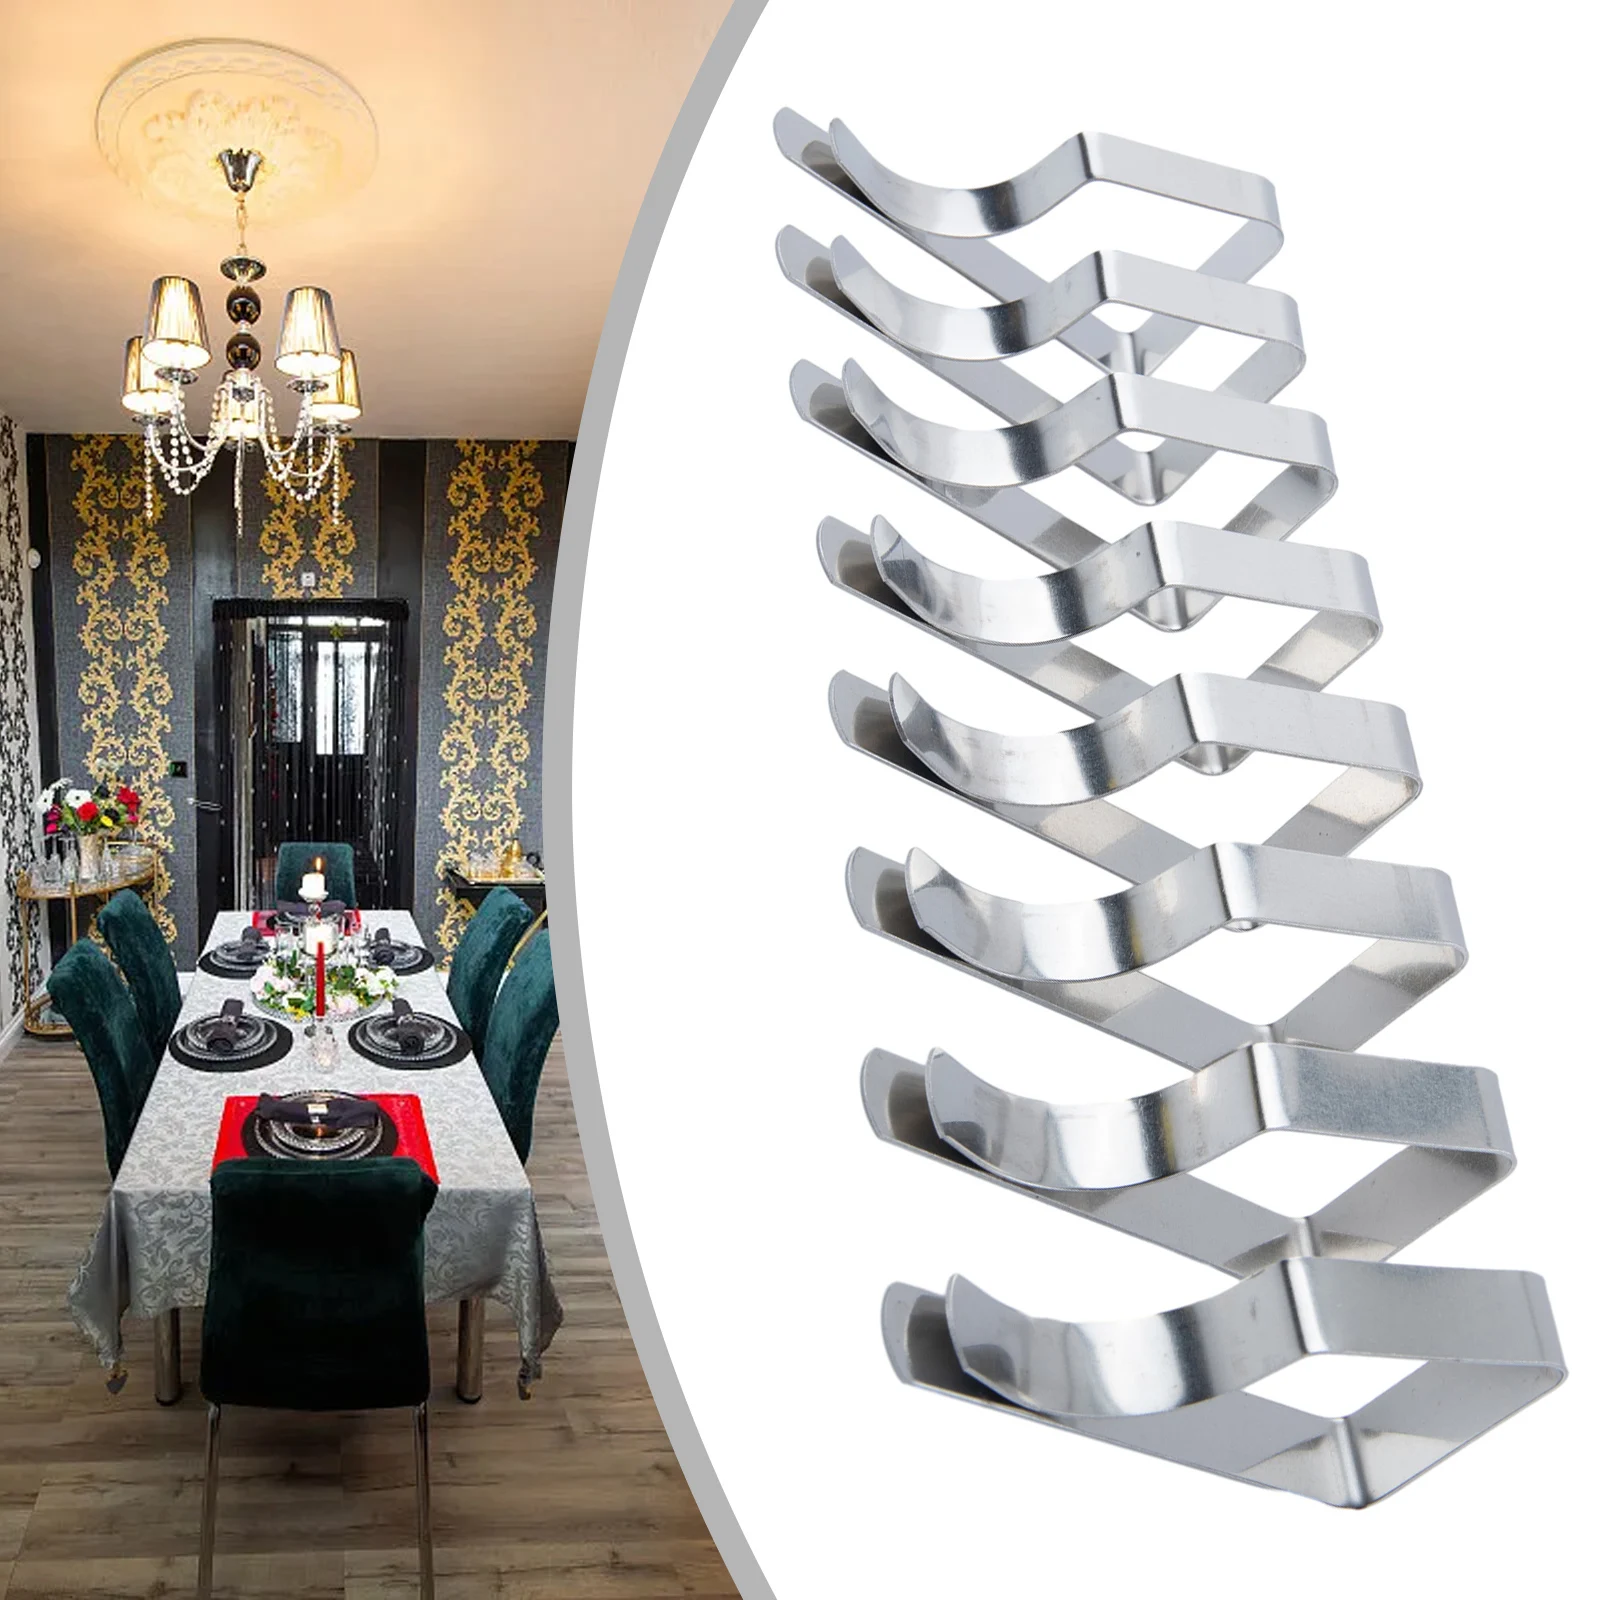 

8 Pcs Stainless Steel Tablecloth Clips Table Cloth Holders Clamp For Outdoor Party Wedding Camping Promenade Table Cover Clamps